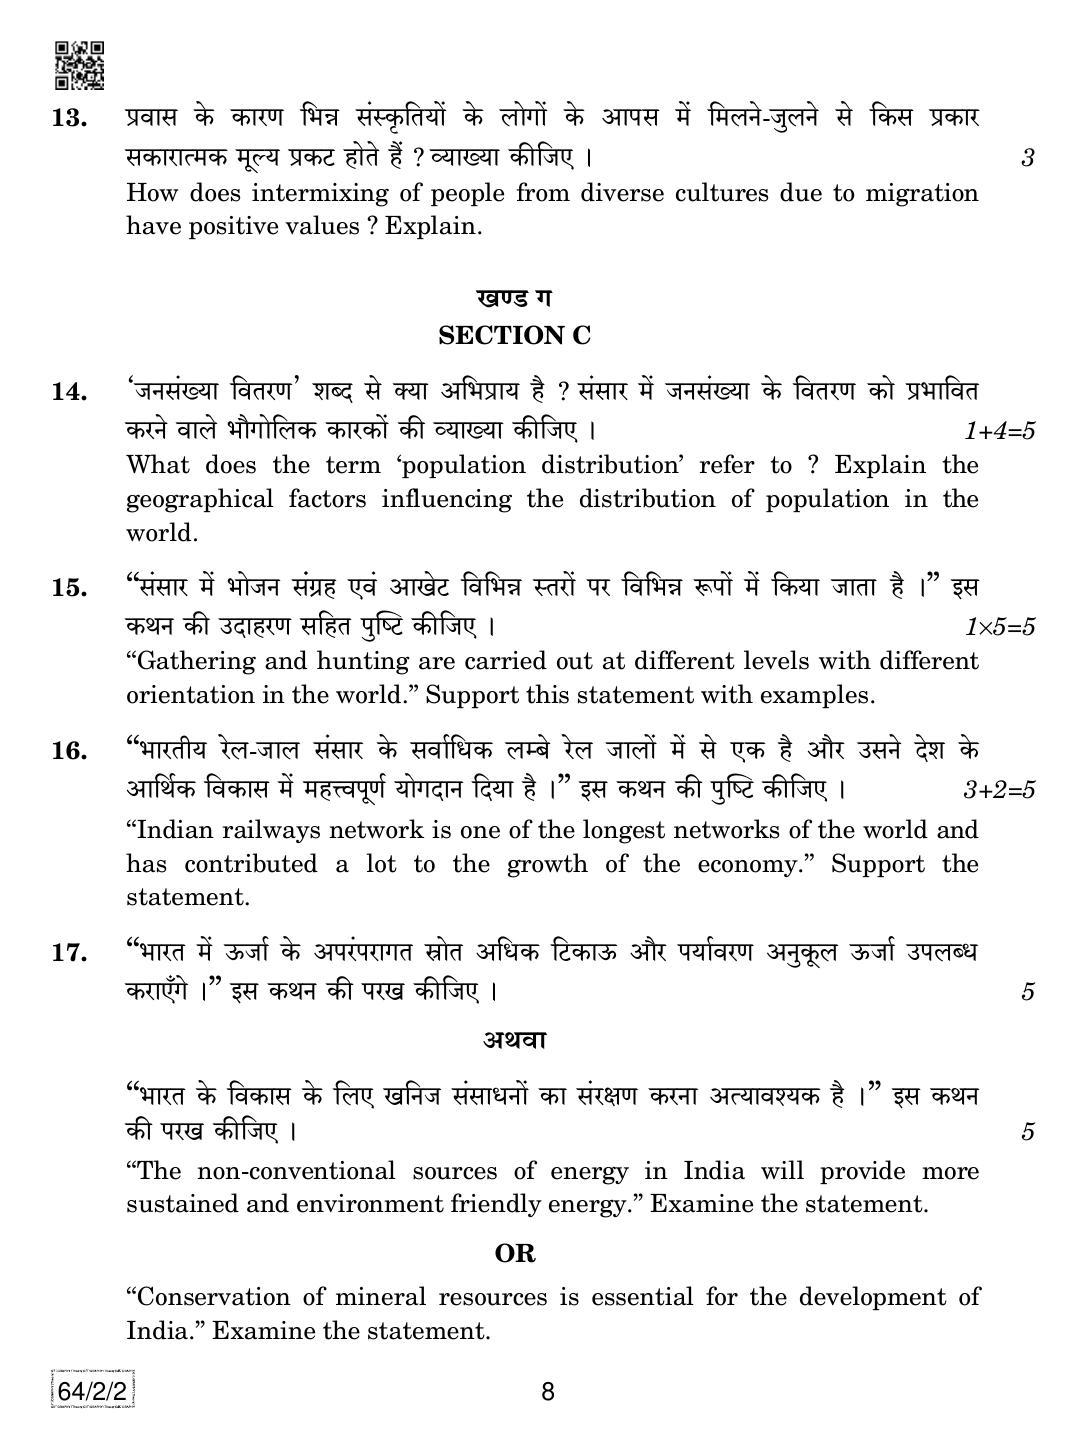 CBSE Class 12 64-2-2 Geography 2019 Question Paper - Page 8